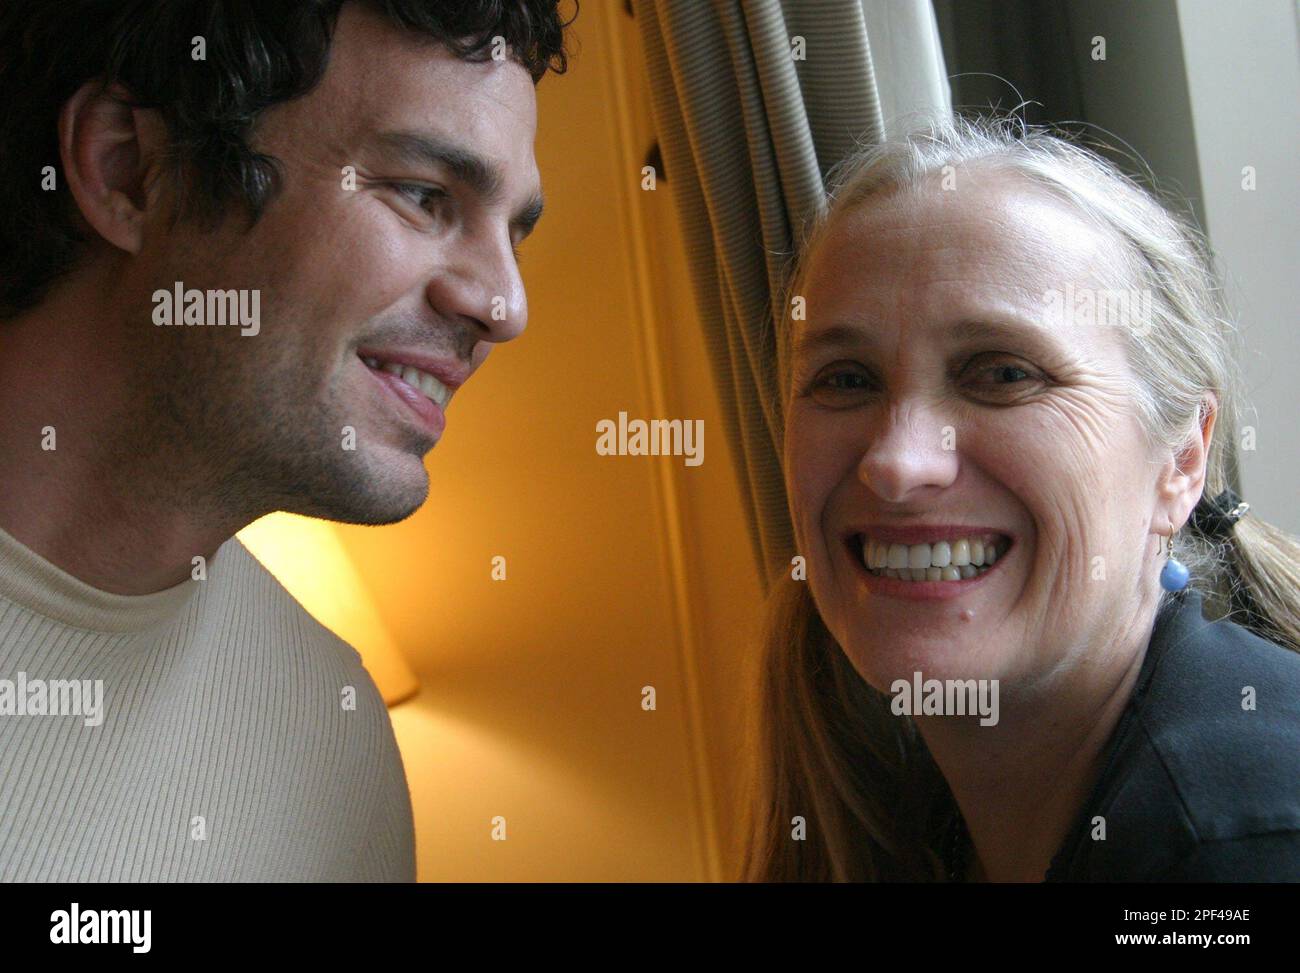 actor mark ruffalo left and director jane campion pose in new york oct 4 2003 campion in conversation doesnt actually say the word comeback but the visionary director of the piano sounds ripe for another film to get the public talking in the cut her latest film stars meg ryan ruffalo and jennifer jason leigh ap phototina fineberg 2PF49AE